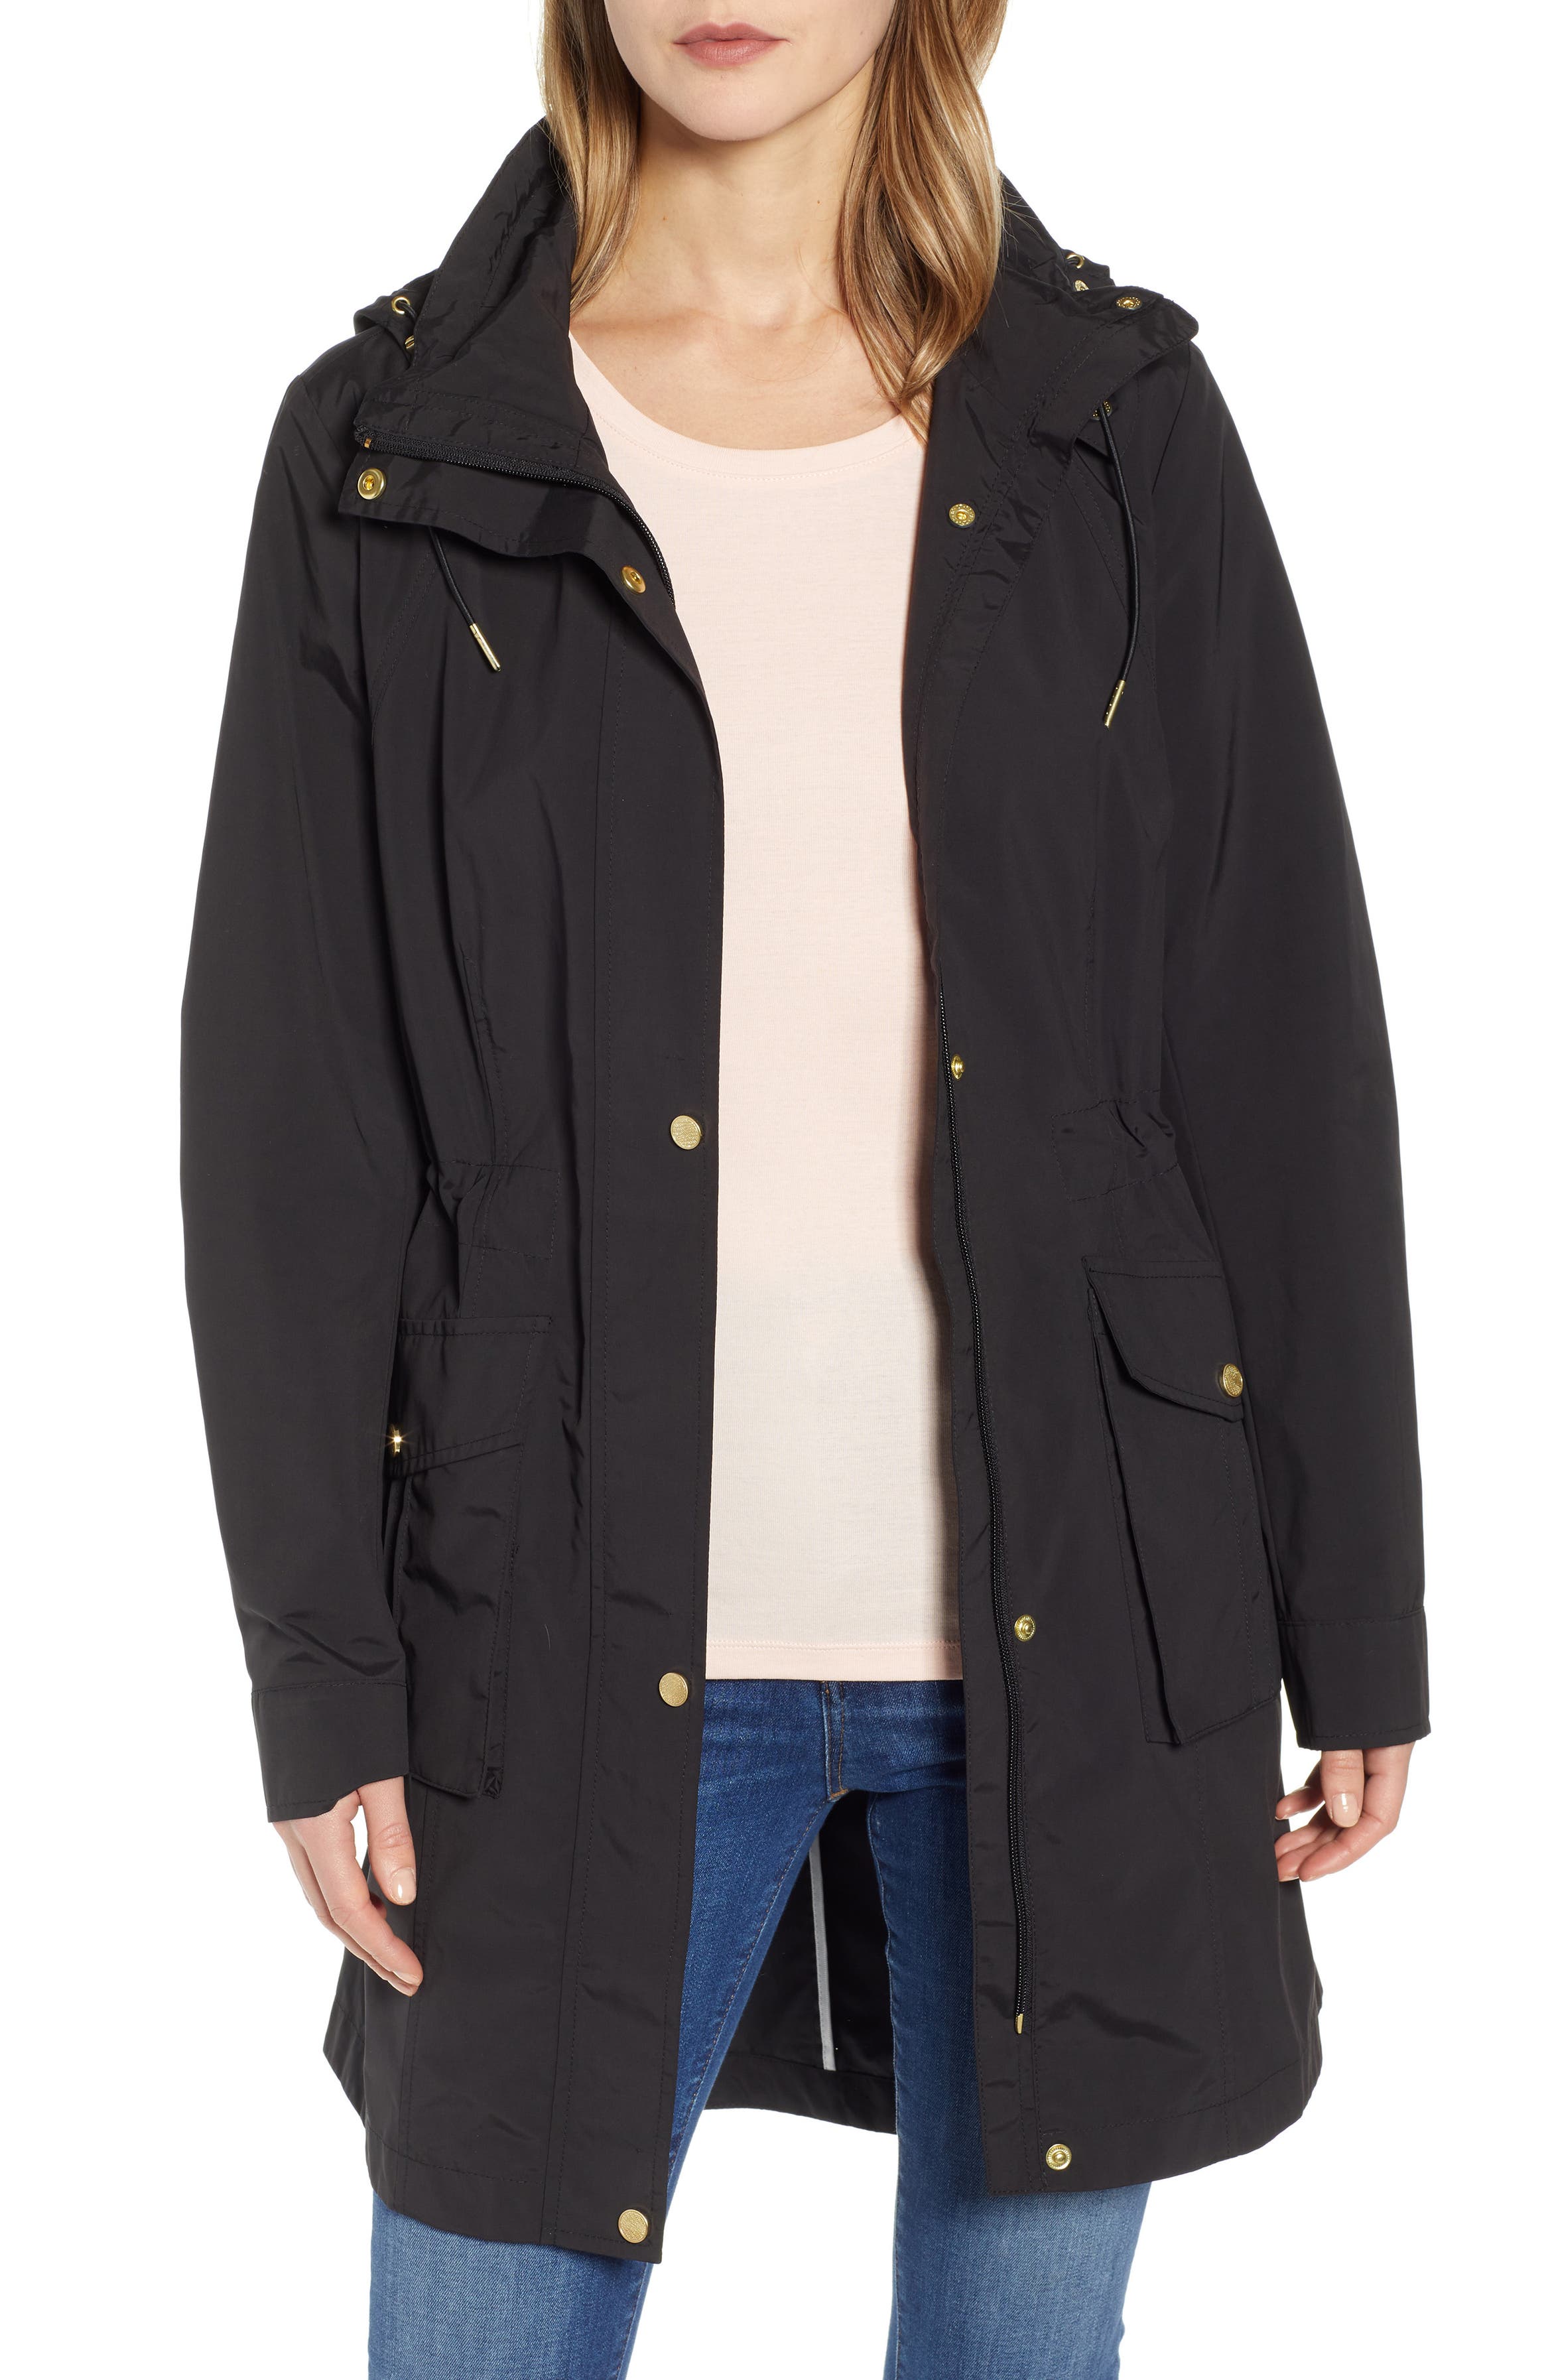 Cole Haan Signature Packable Rain Jacket with Removable Hood | Nordstrom